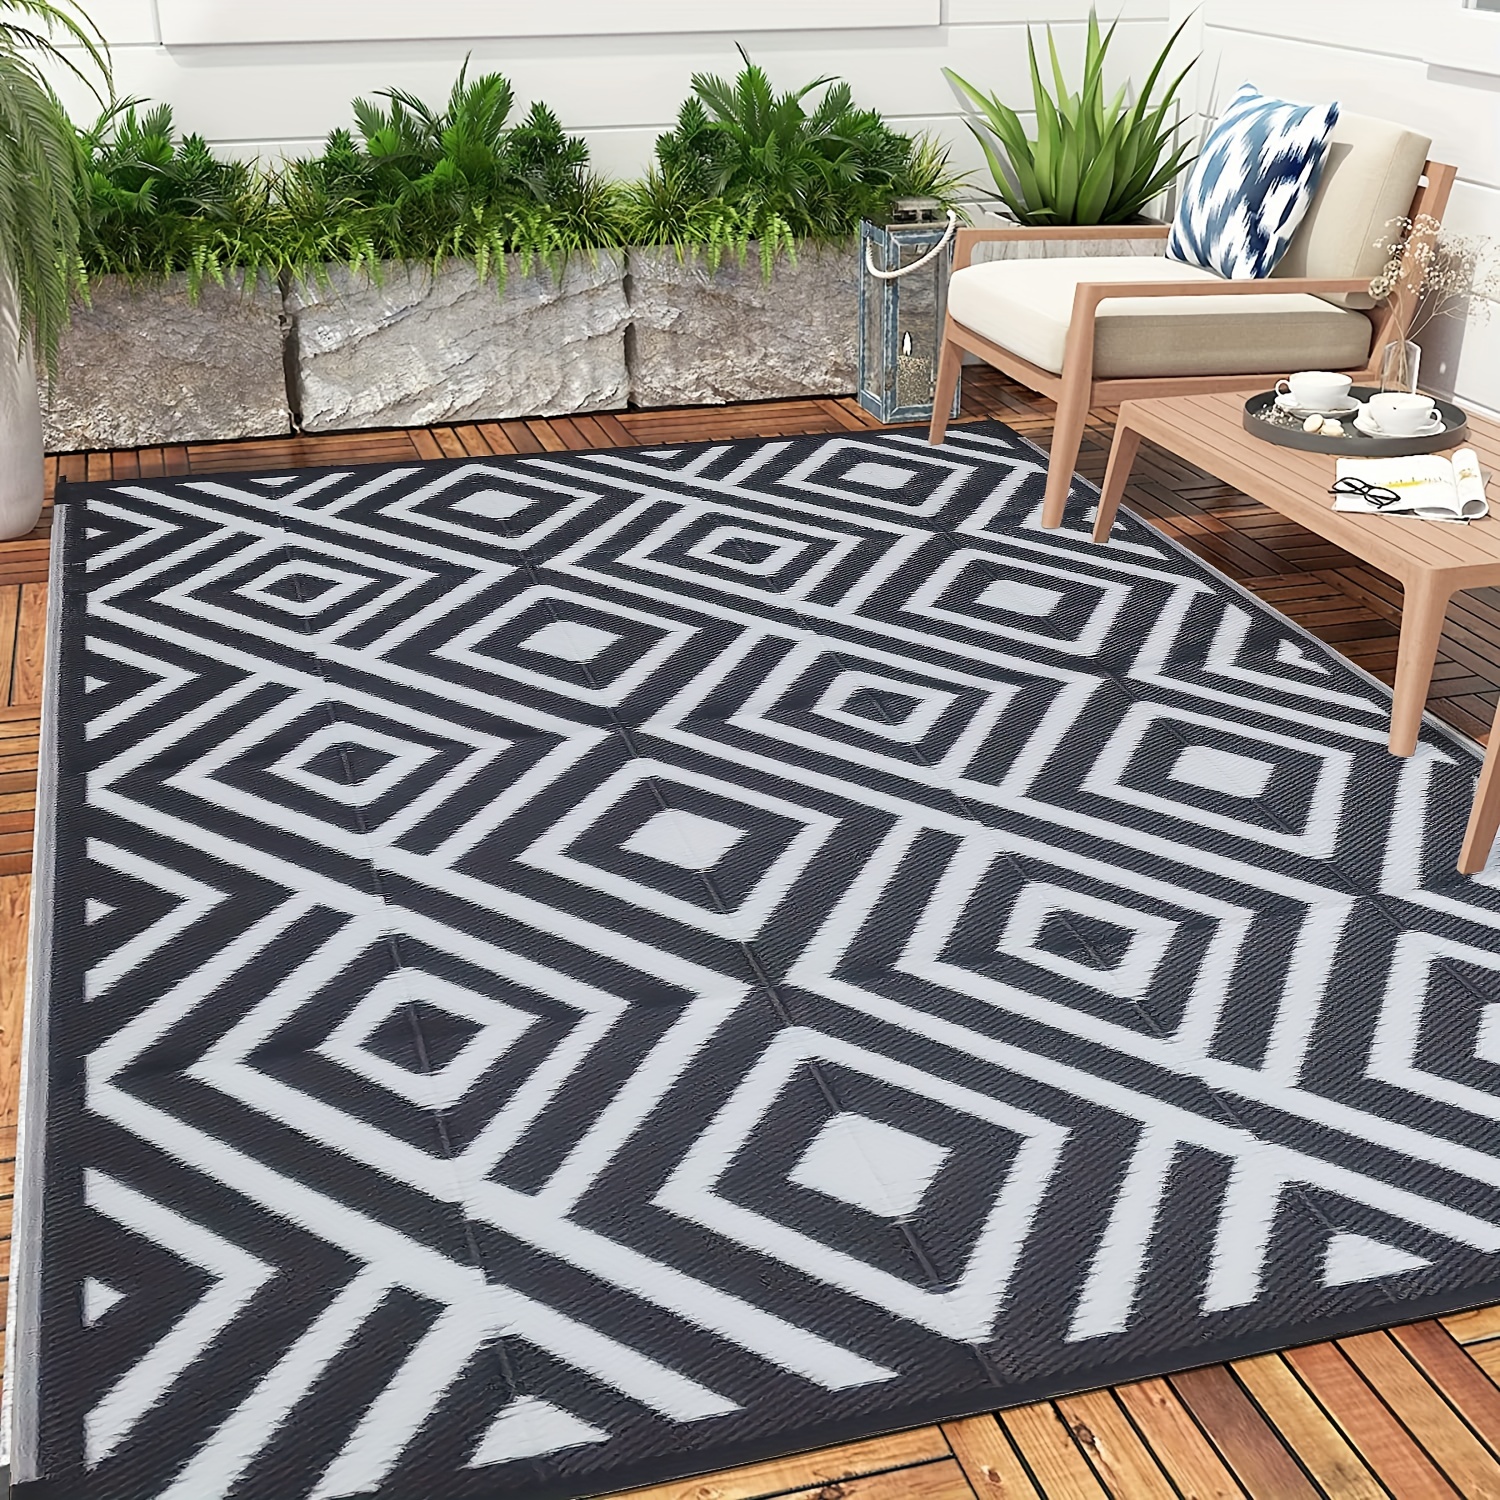 Outdoor Rug, Outdoor Rugs 9x12 for Patios Clearance, Large Waterproof  Outdoor Area Rug, Reversible Portable Outdoor Plastic Straw Carpet for RV  Deck